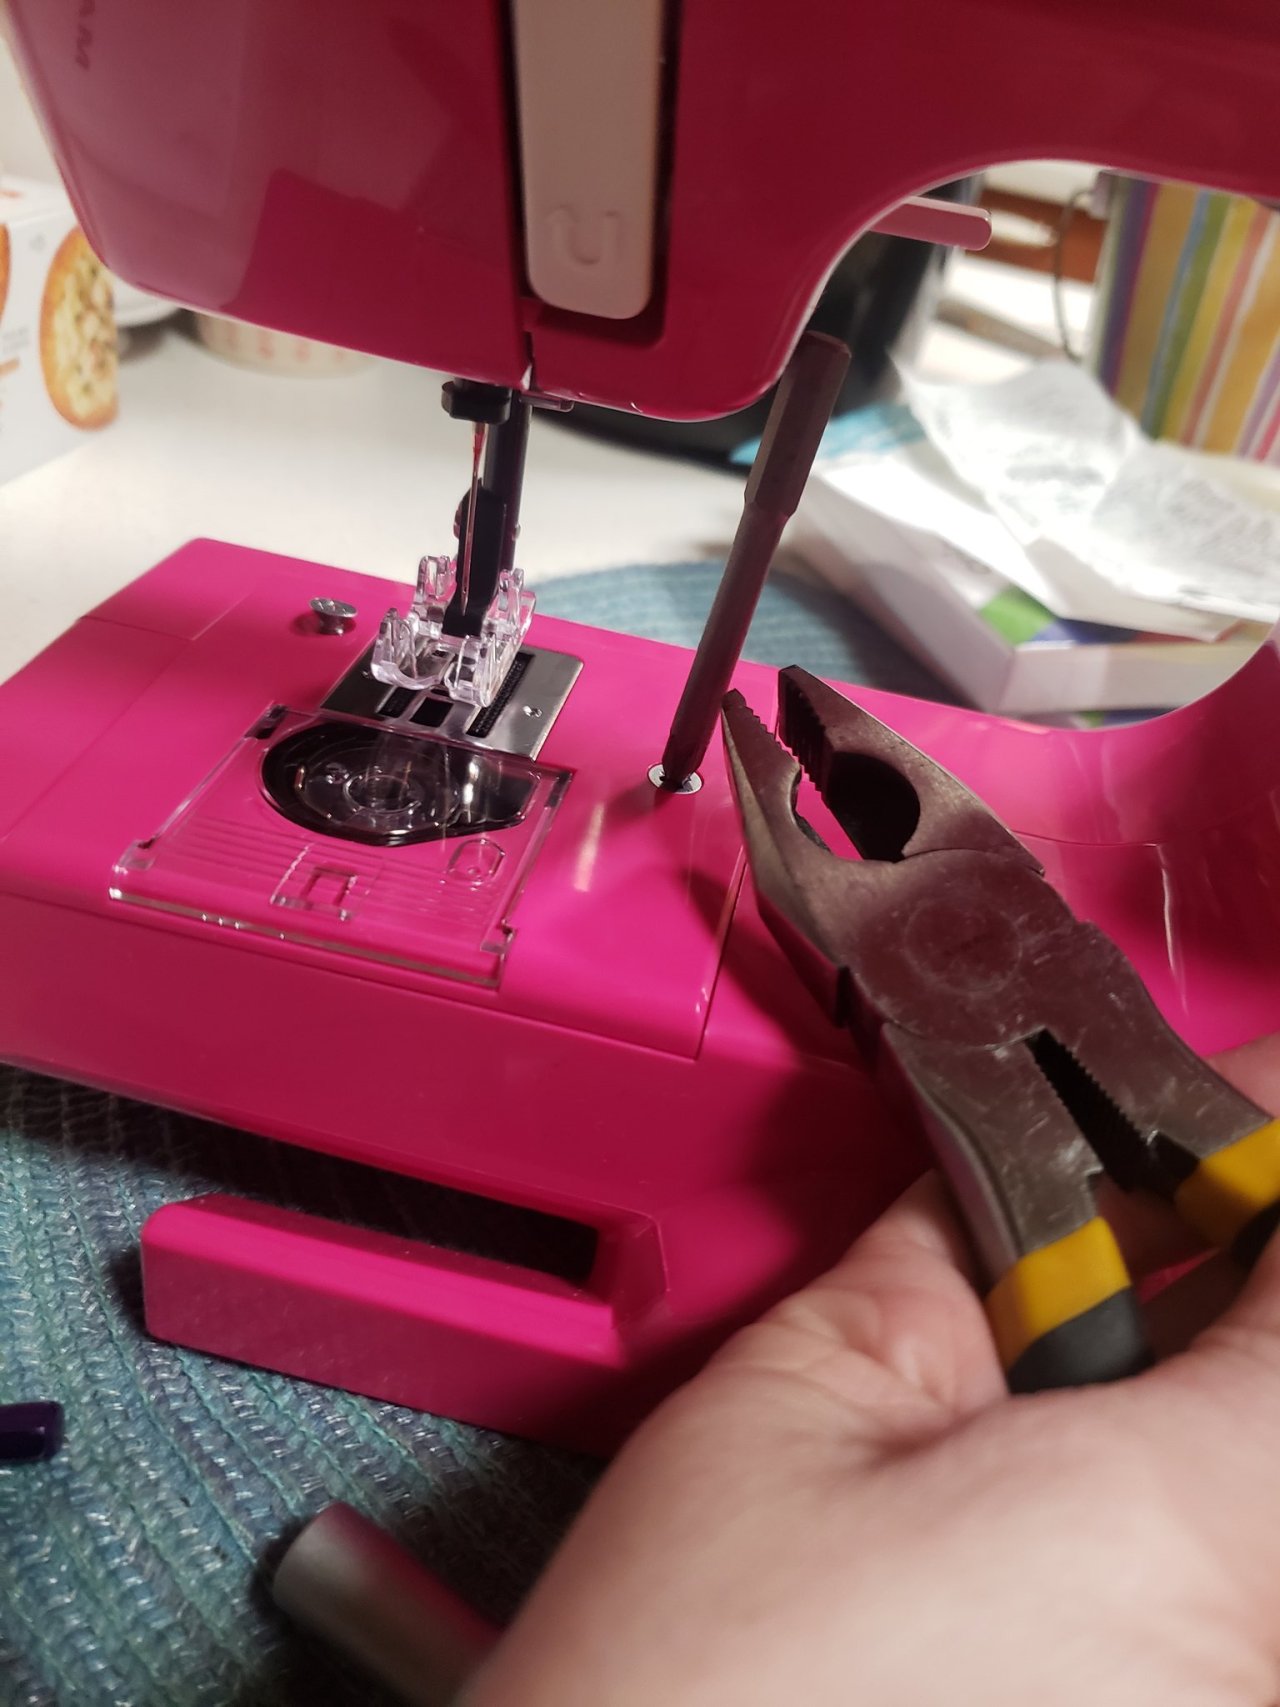 A few thoughts about the Janome 124 (Sew Mini) – Come Stitch With Me, LLC